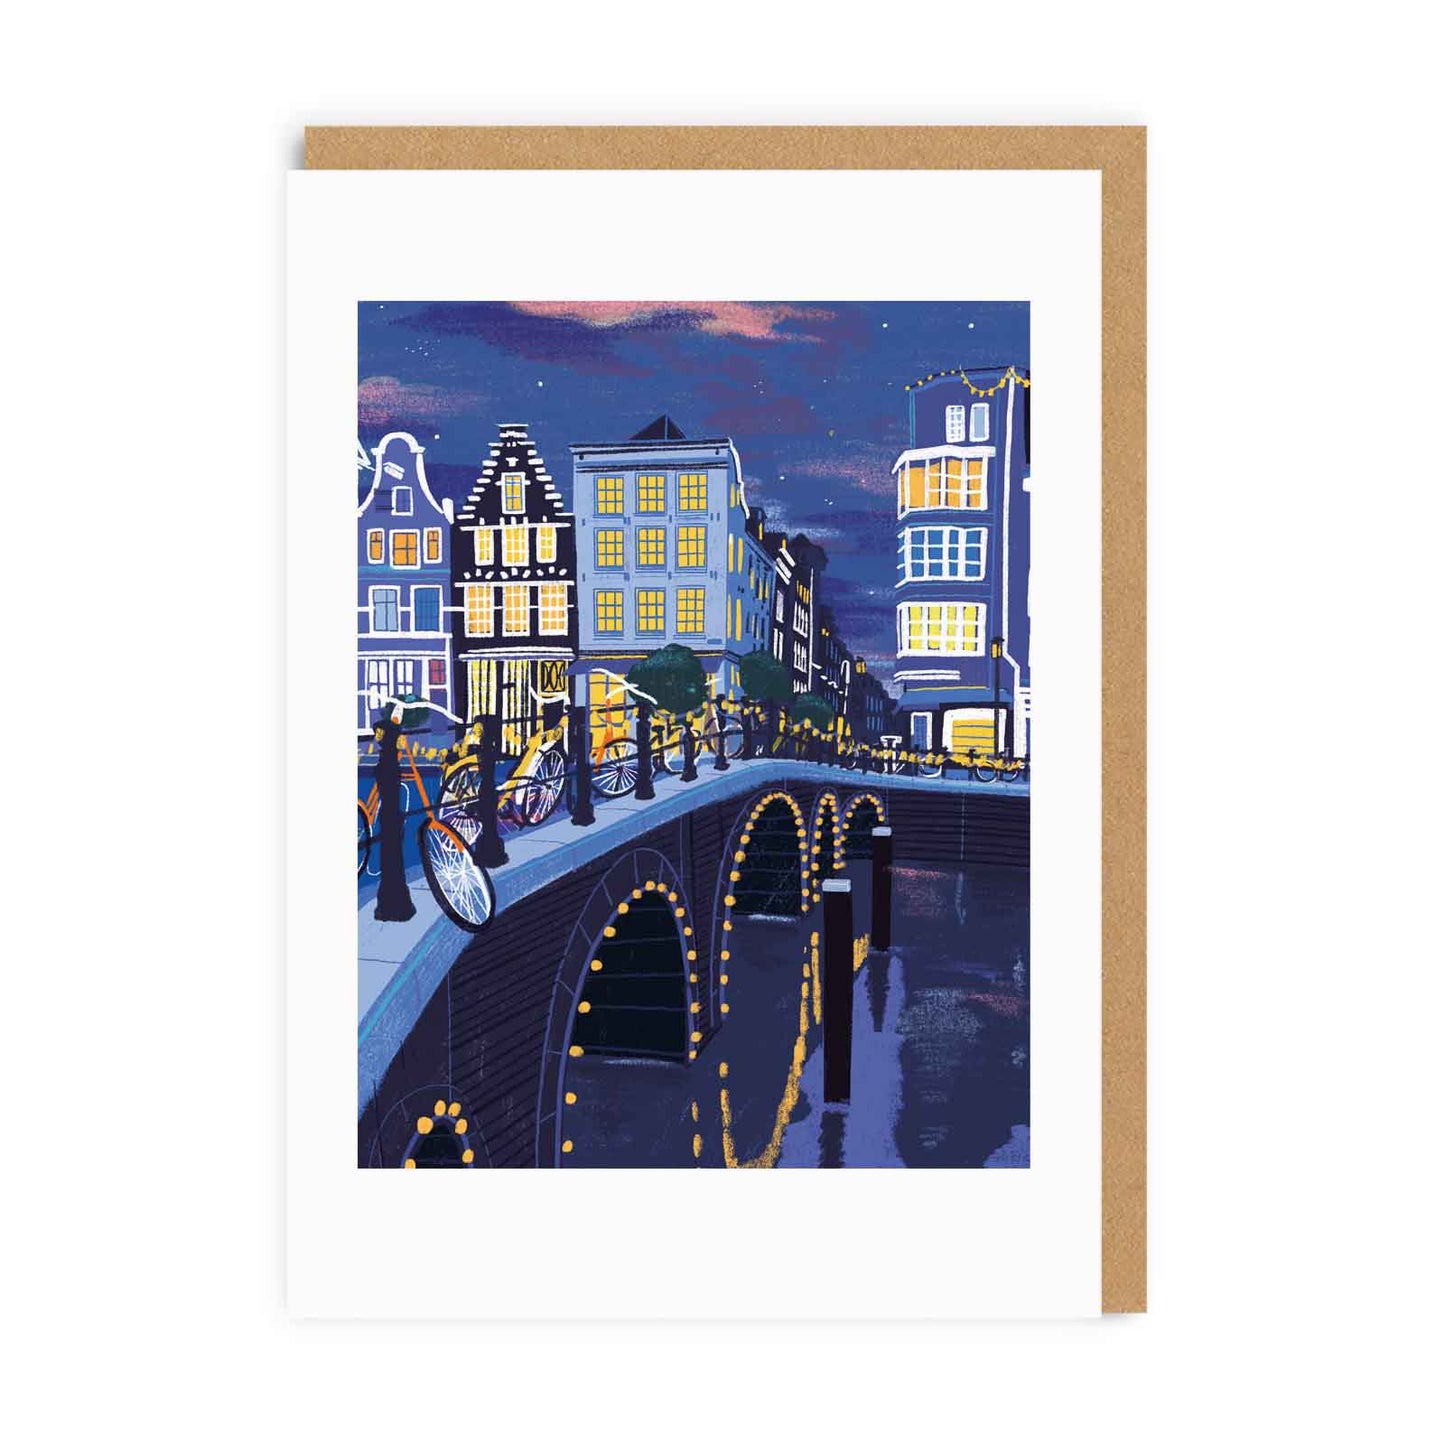 Greetibng card with an illustration depicting an Amsterdam canal bridge at night